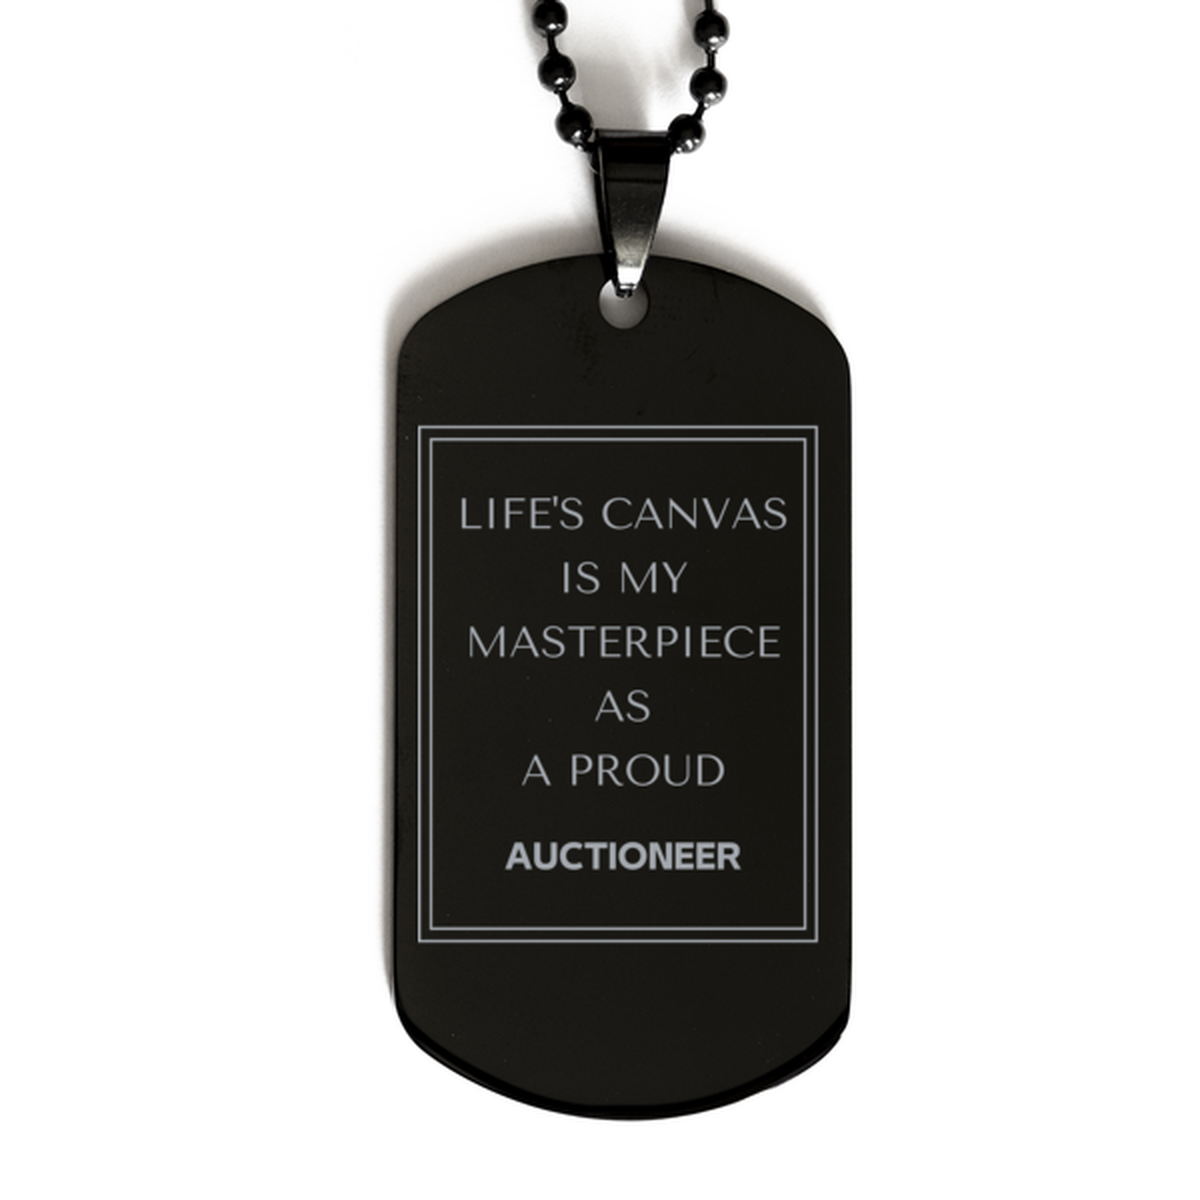 Proud Auctioneer Gifts, Life's canvas is my masterpiece, Epic Birthday Christmas Unique Black Dog Tag For Auctioneer, Coworkers, Men, Women, Friends